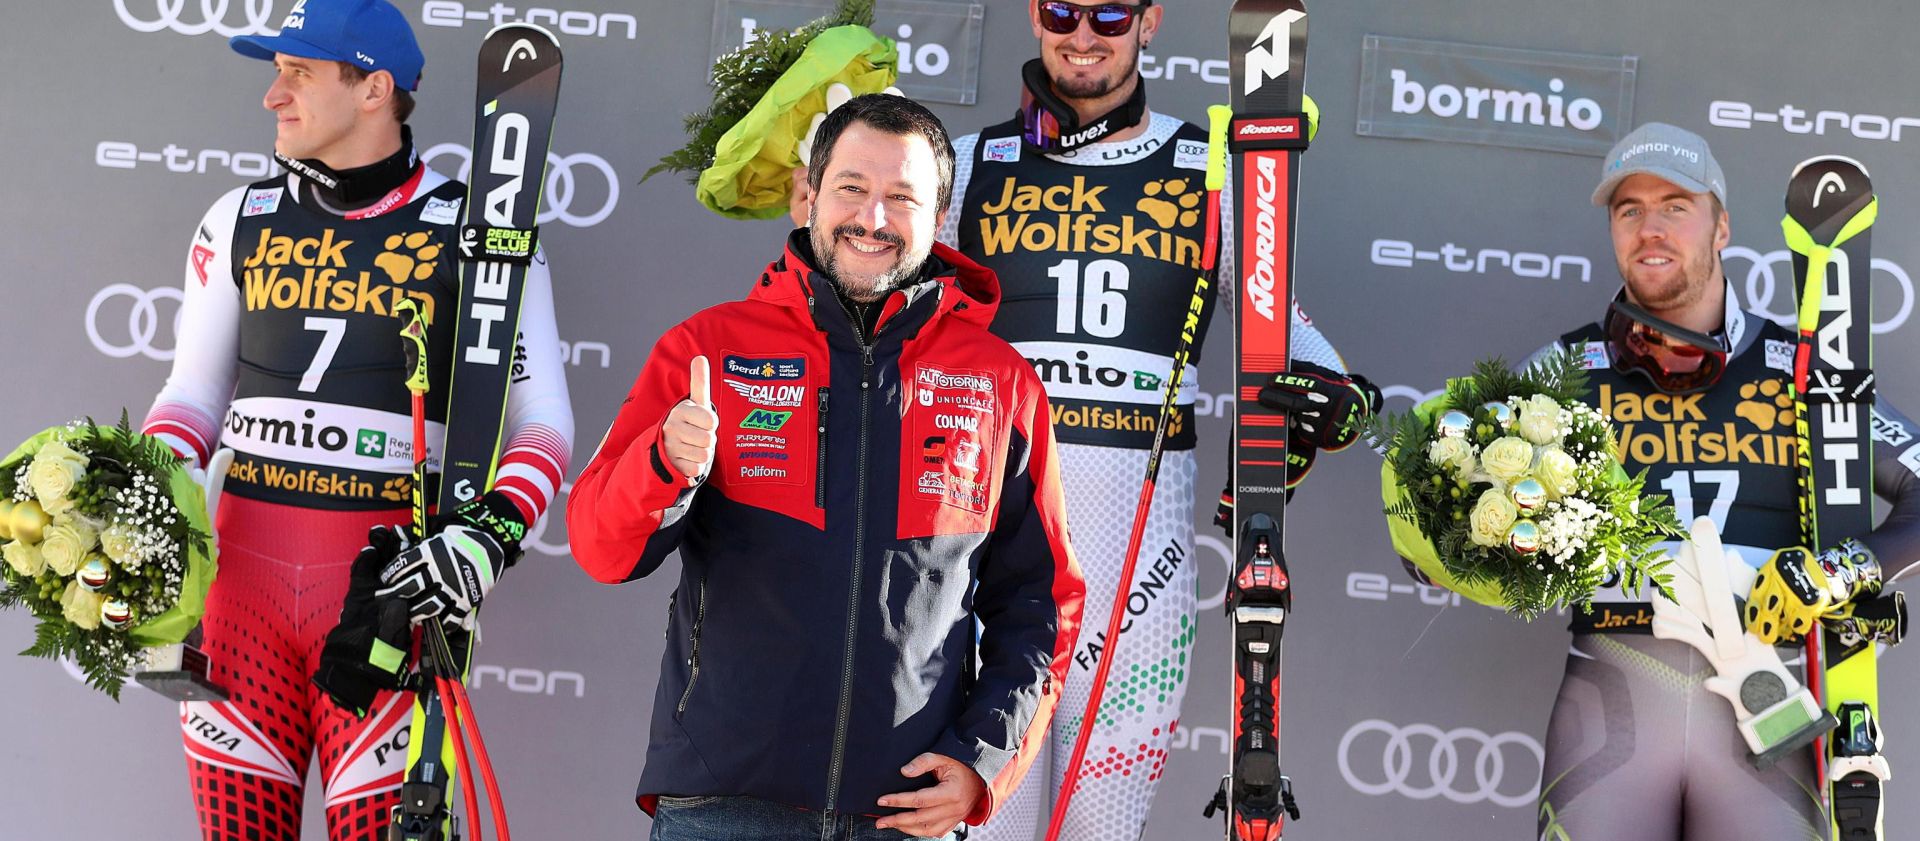 epa07252771 Italian Prime Minister Matteo Salvini (C) with second placed Matthias Mayer (L) of Austria, winner Dominik Paris (R) of Italy and third placed Aleksander Aamodt Kilde (2-R) of Norway celebrate on the podium after the Men's SuperG race at the FIS Alpine Skiing World Cup in Bormio, Italy, 29 December 2018.  EPA/ANDREA SOLERO